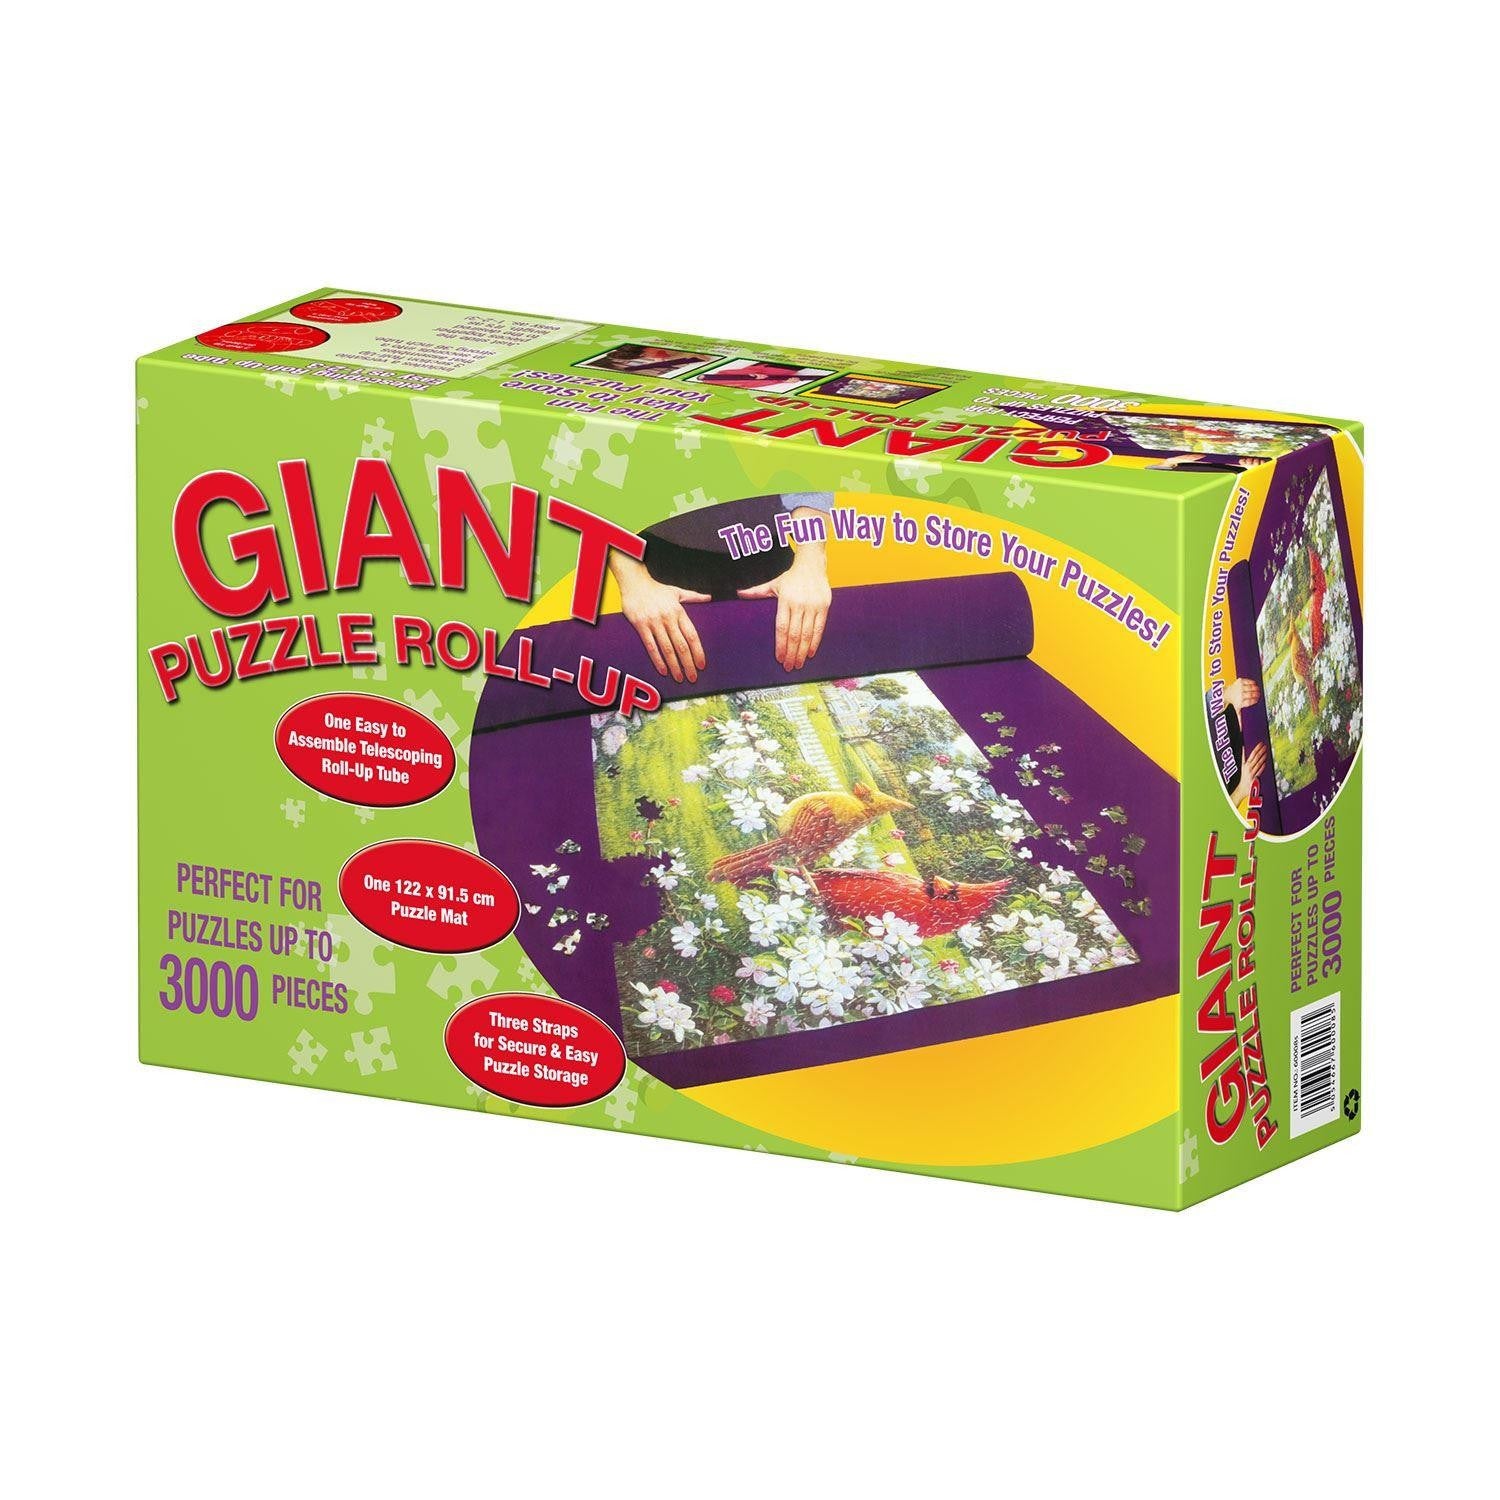 Giant Jumbo Puzzle Roll Up